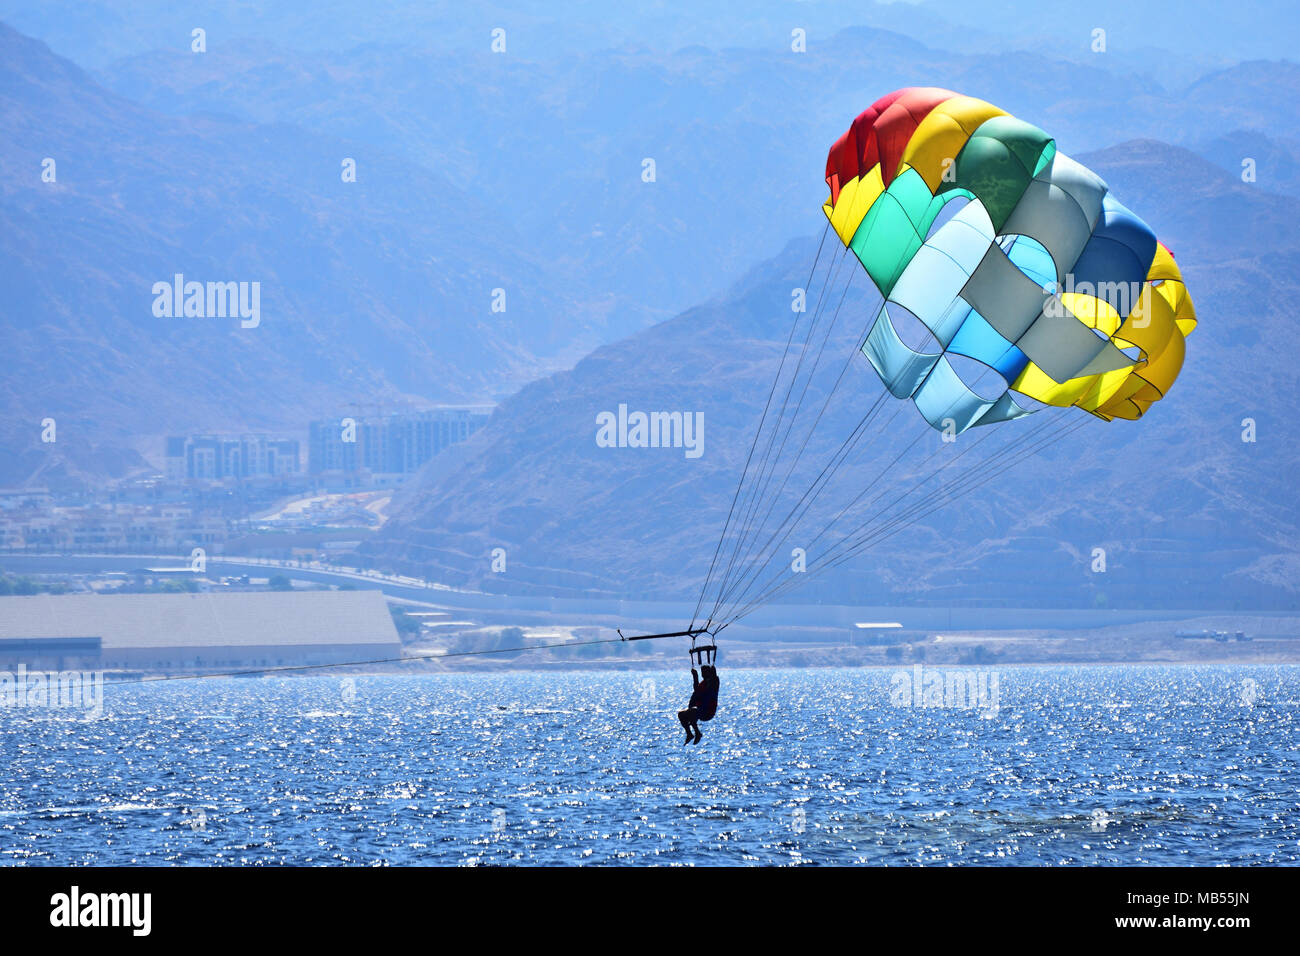 Parasailing entertainment at the beach of Eilat - israeli resort city at the red sea. Stock Photo